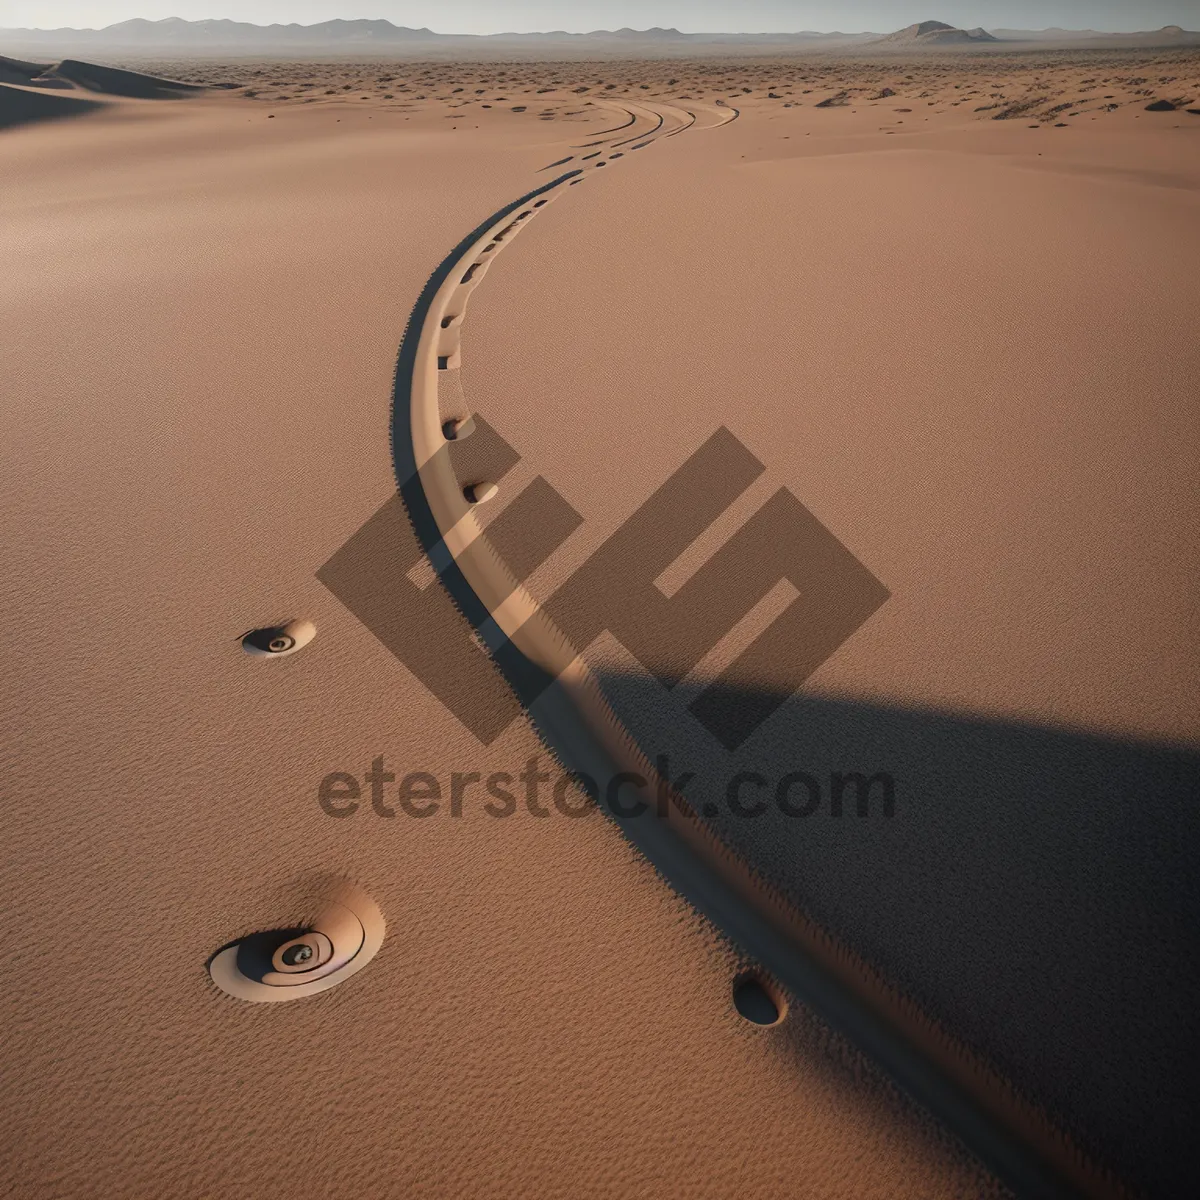 Picture of Portable Computer Traveling through the Sand Dunes